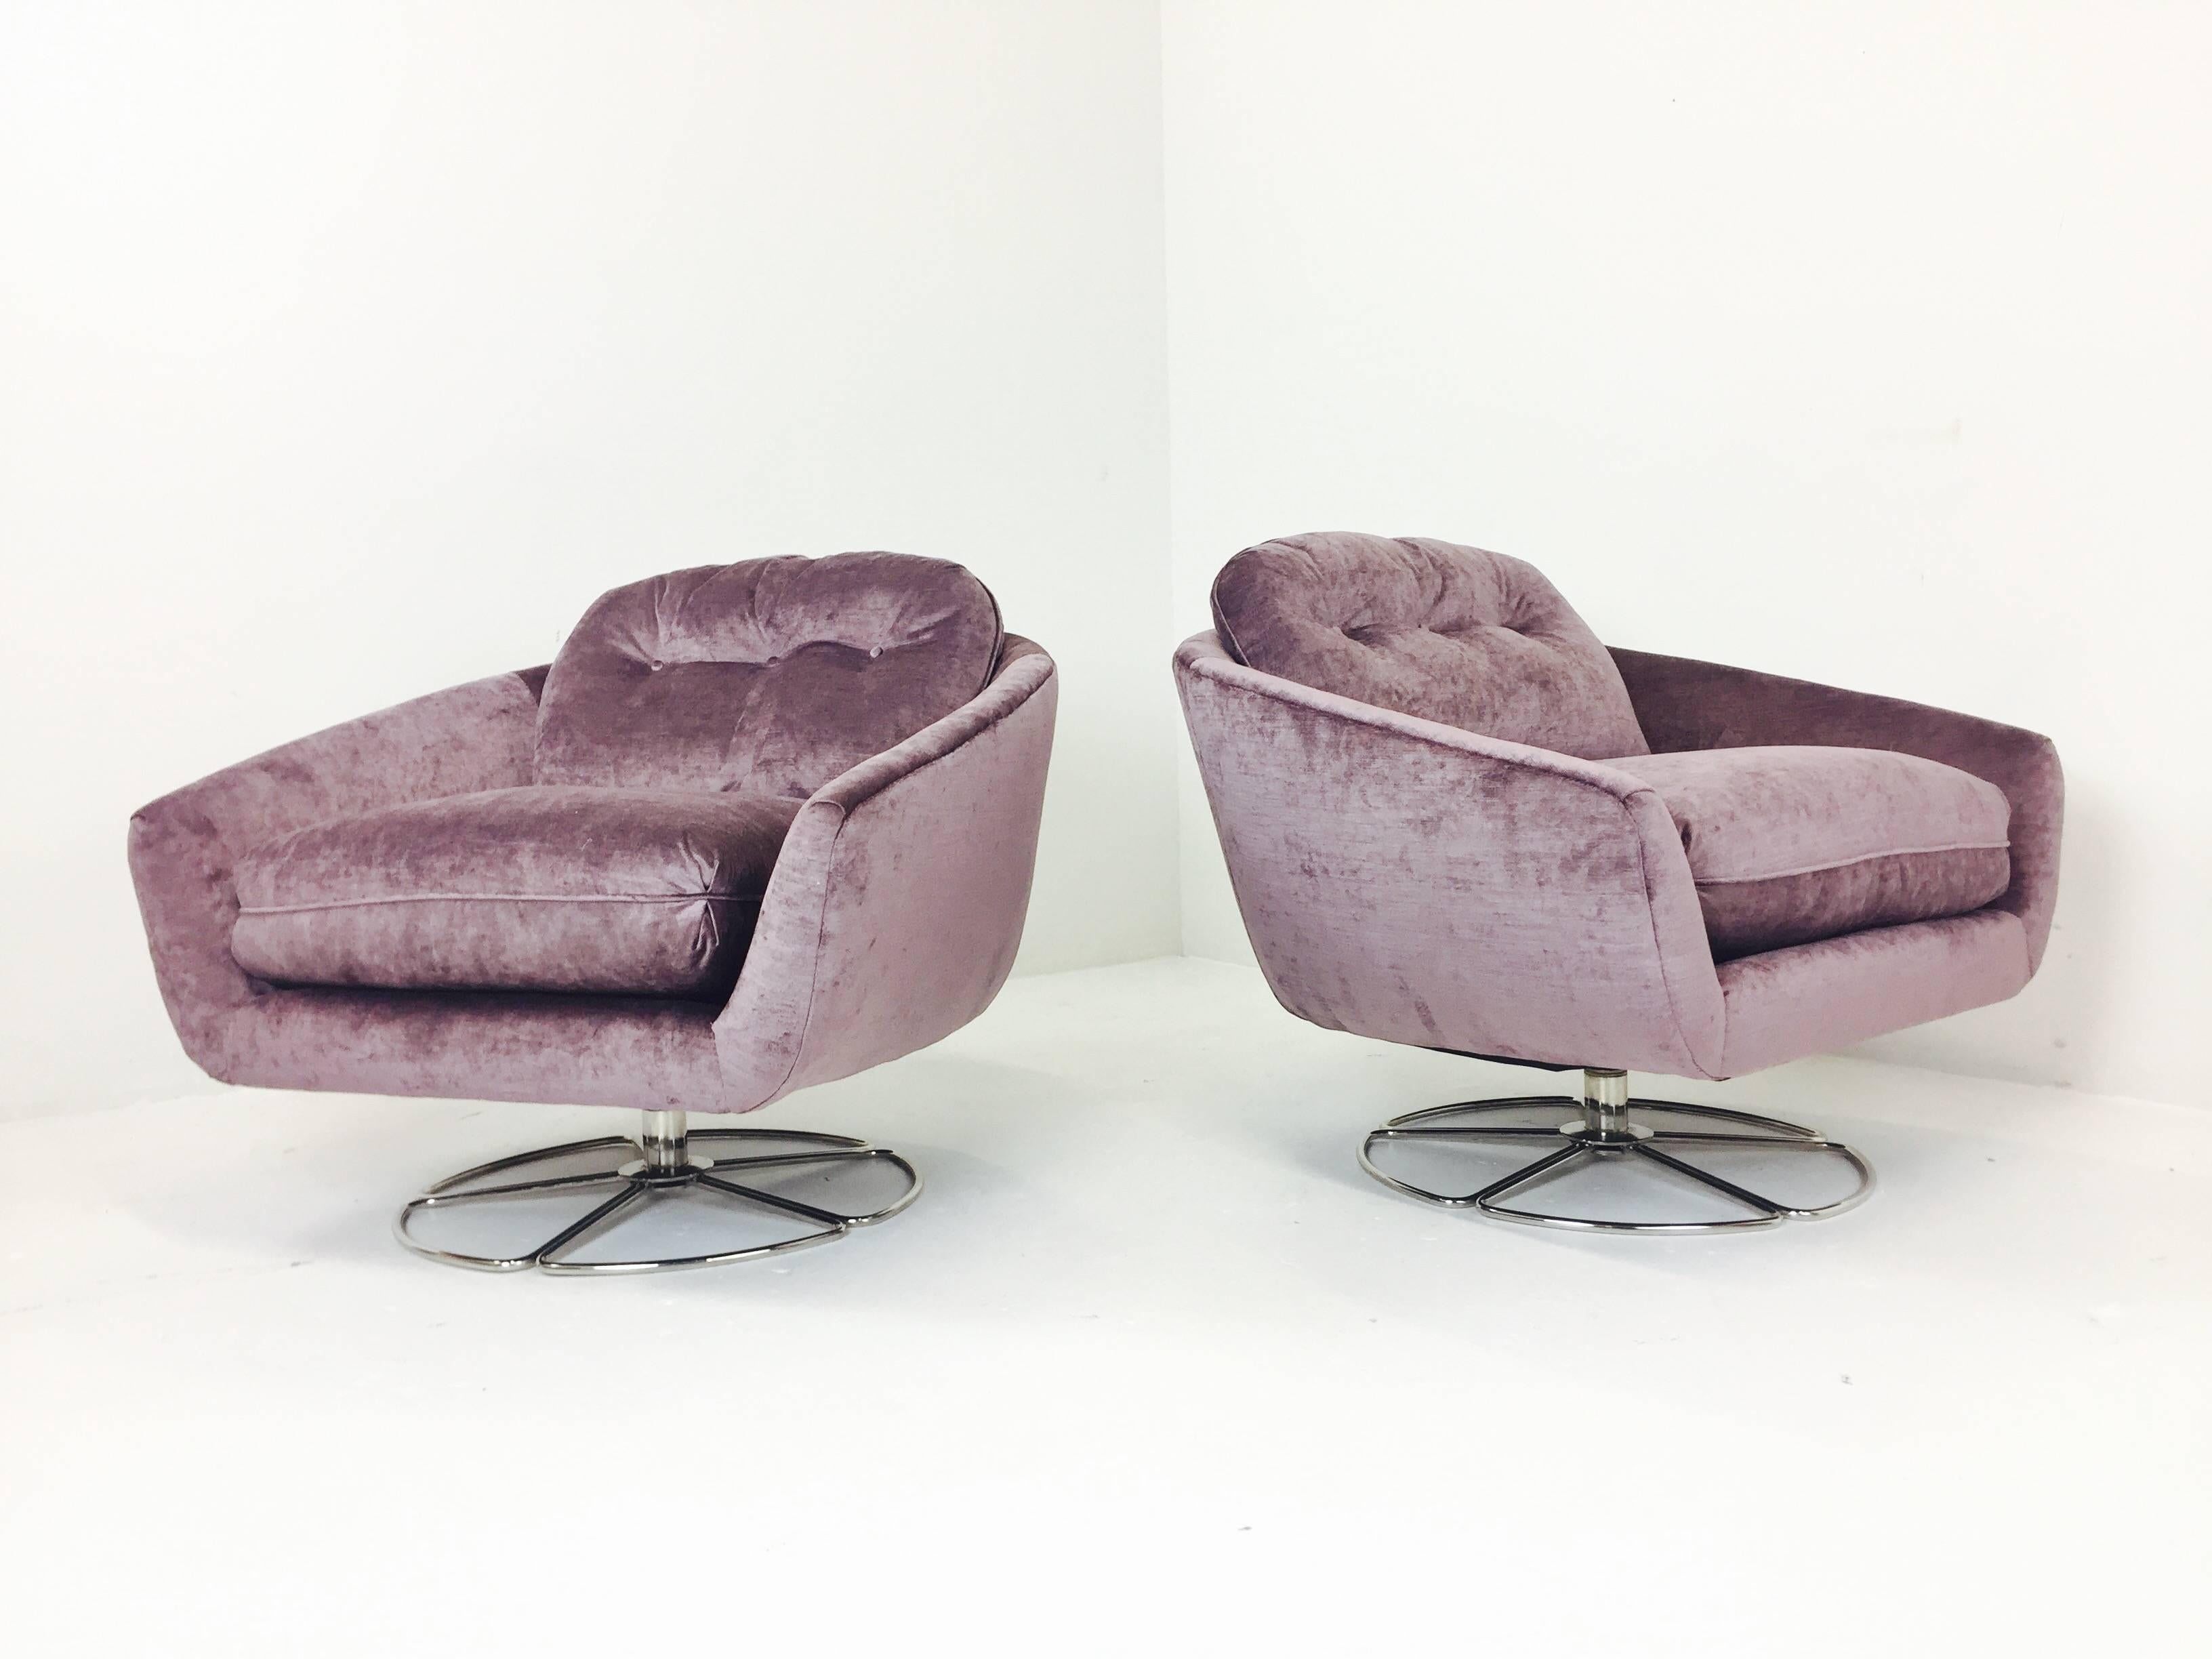 Newly upholstered swivel chairs with chrome lotus bases by Selig.

Dimensions: 34